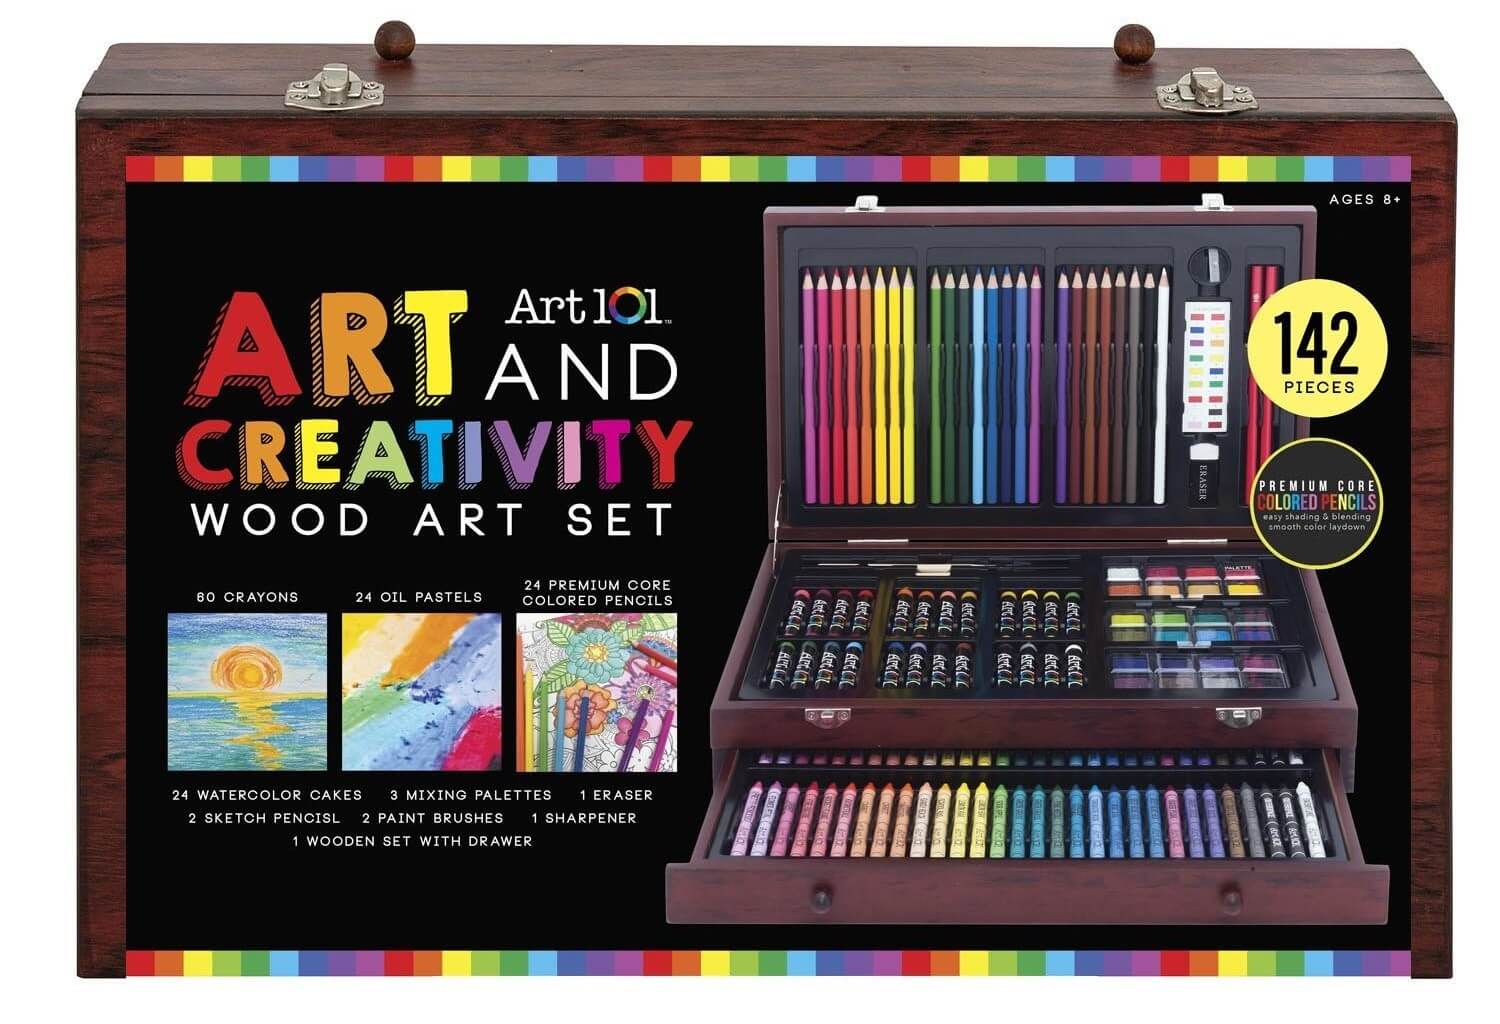 Useful educational gift for Christmas Art 101 Art and Creativity Wood Art Set. 60 Crayons, 24 Oil Pastels, 24 Premium Core Colored Pencils, 24 Watercolor Cakes, 3 Mixed Palettes, 1 Eraser, 2 Sketch Pencils, 2 Paint Brushes, 1 Sharpener, 1 Wooden Set With Drawer. 142 Pieces Wood Art Set. Premium Core Colored Pencils. Easy Shading and Blending Smooth Color Laydown.